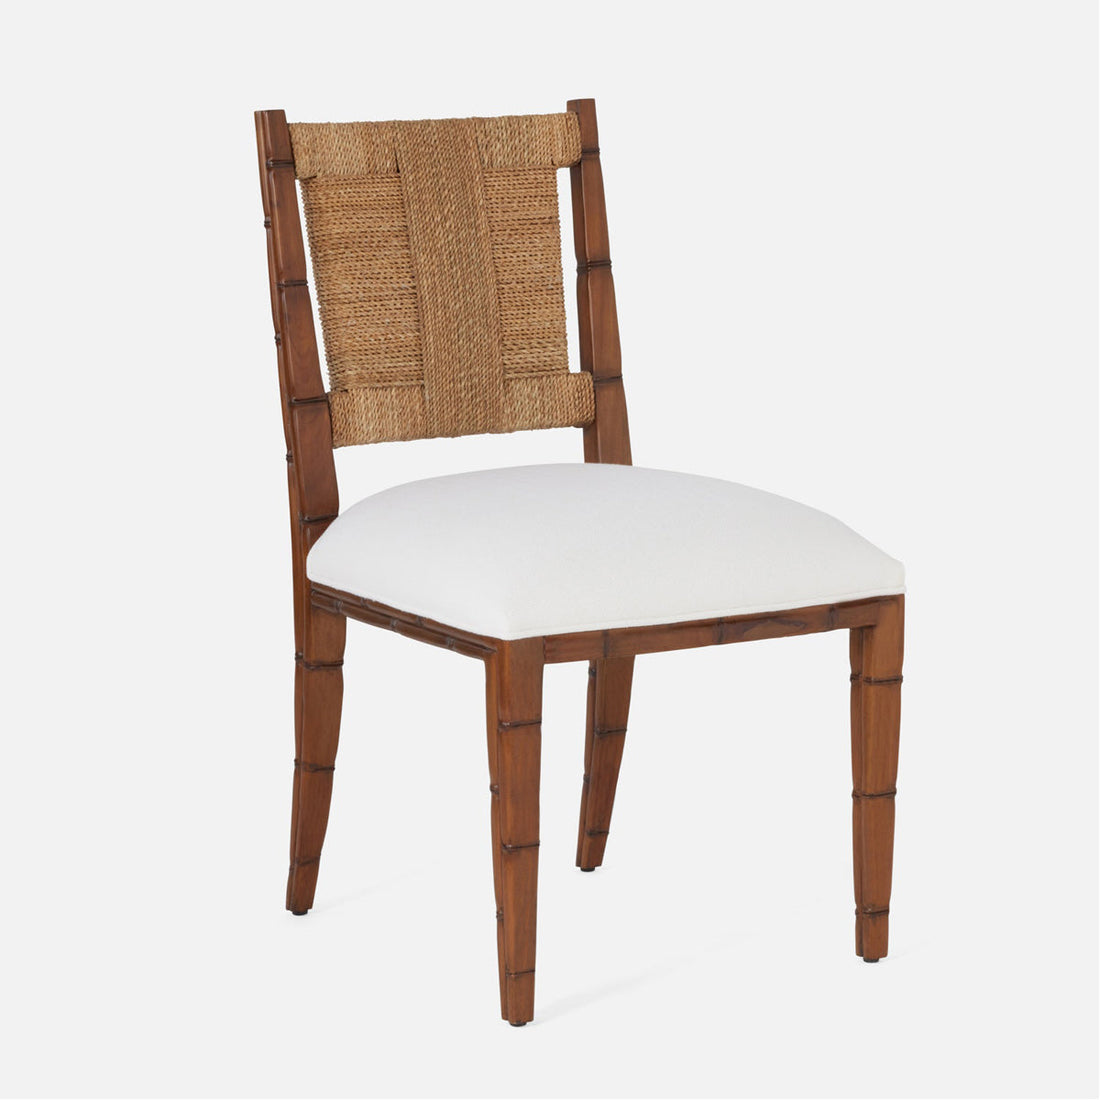 Made Goods Kiera Dining Chair in Kern Mix Fabric